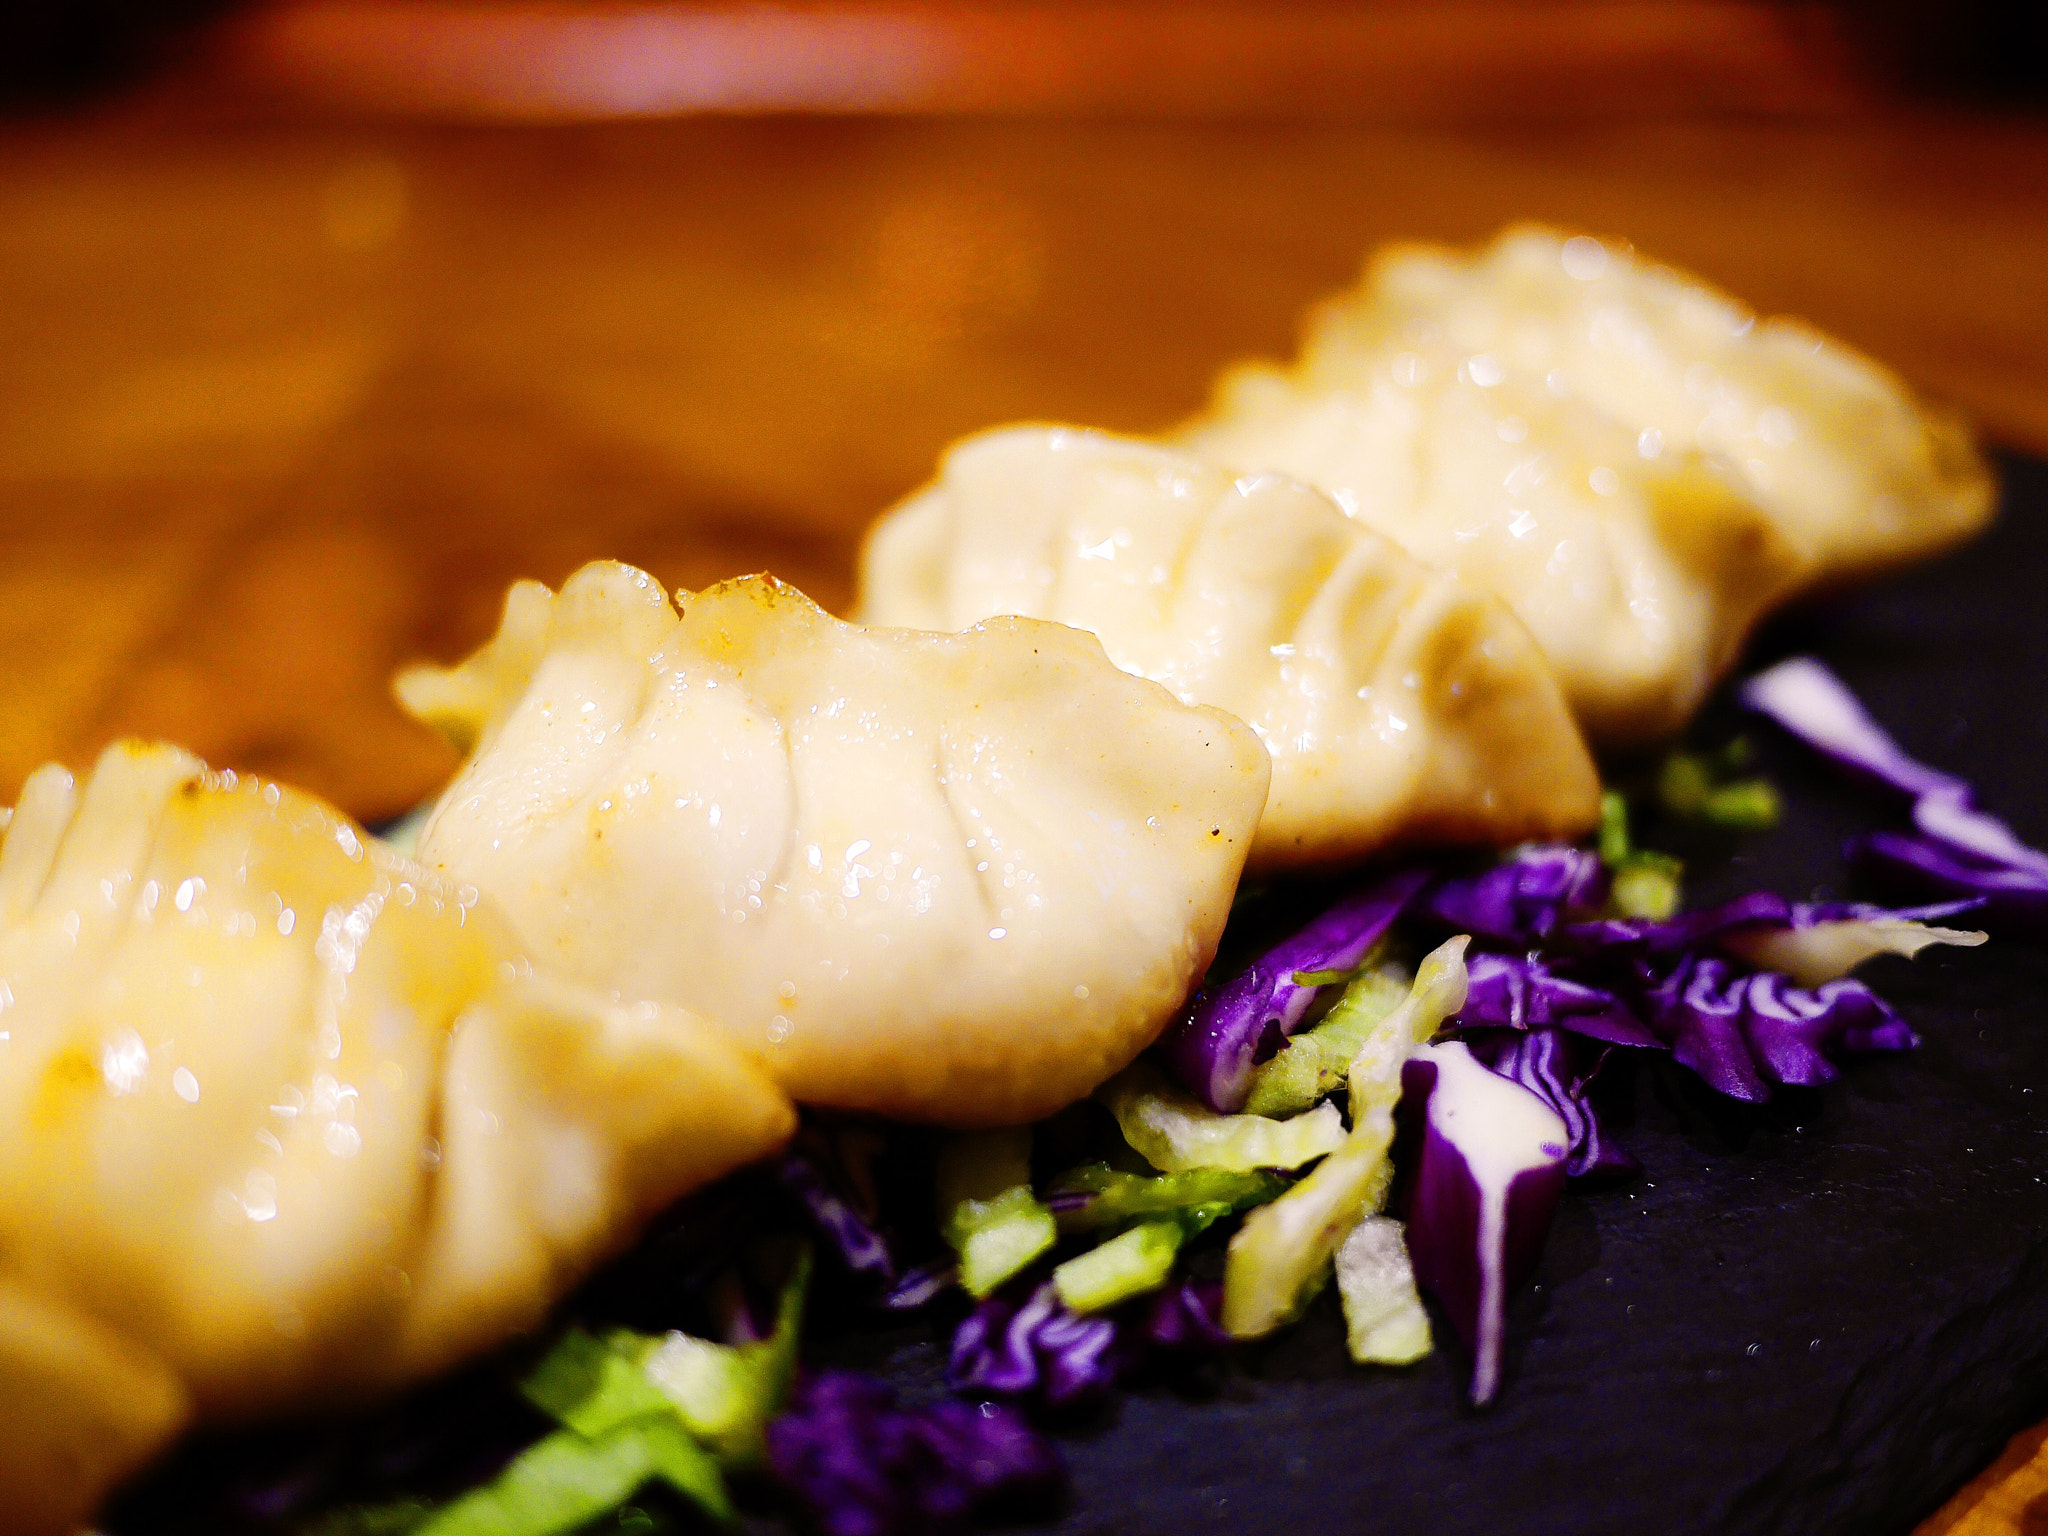 NO-ACCESSORY sample photo. Fired dumplings photography